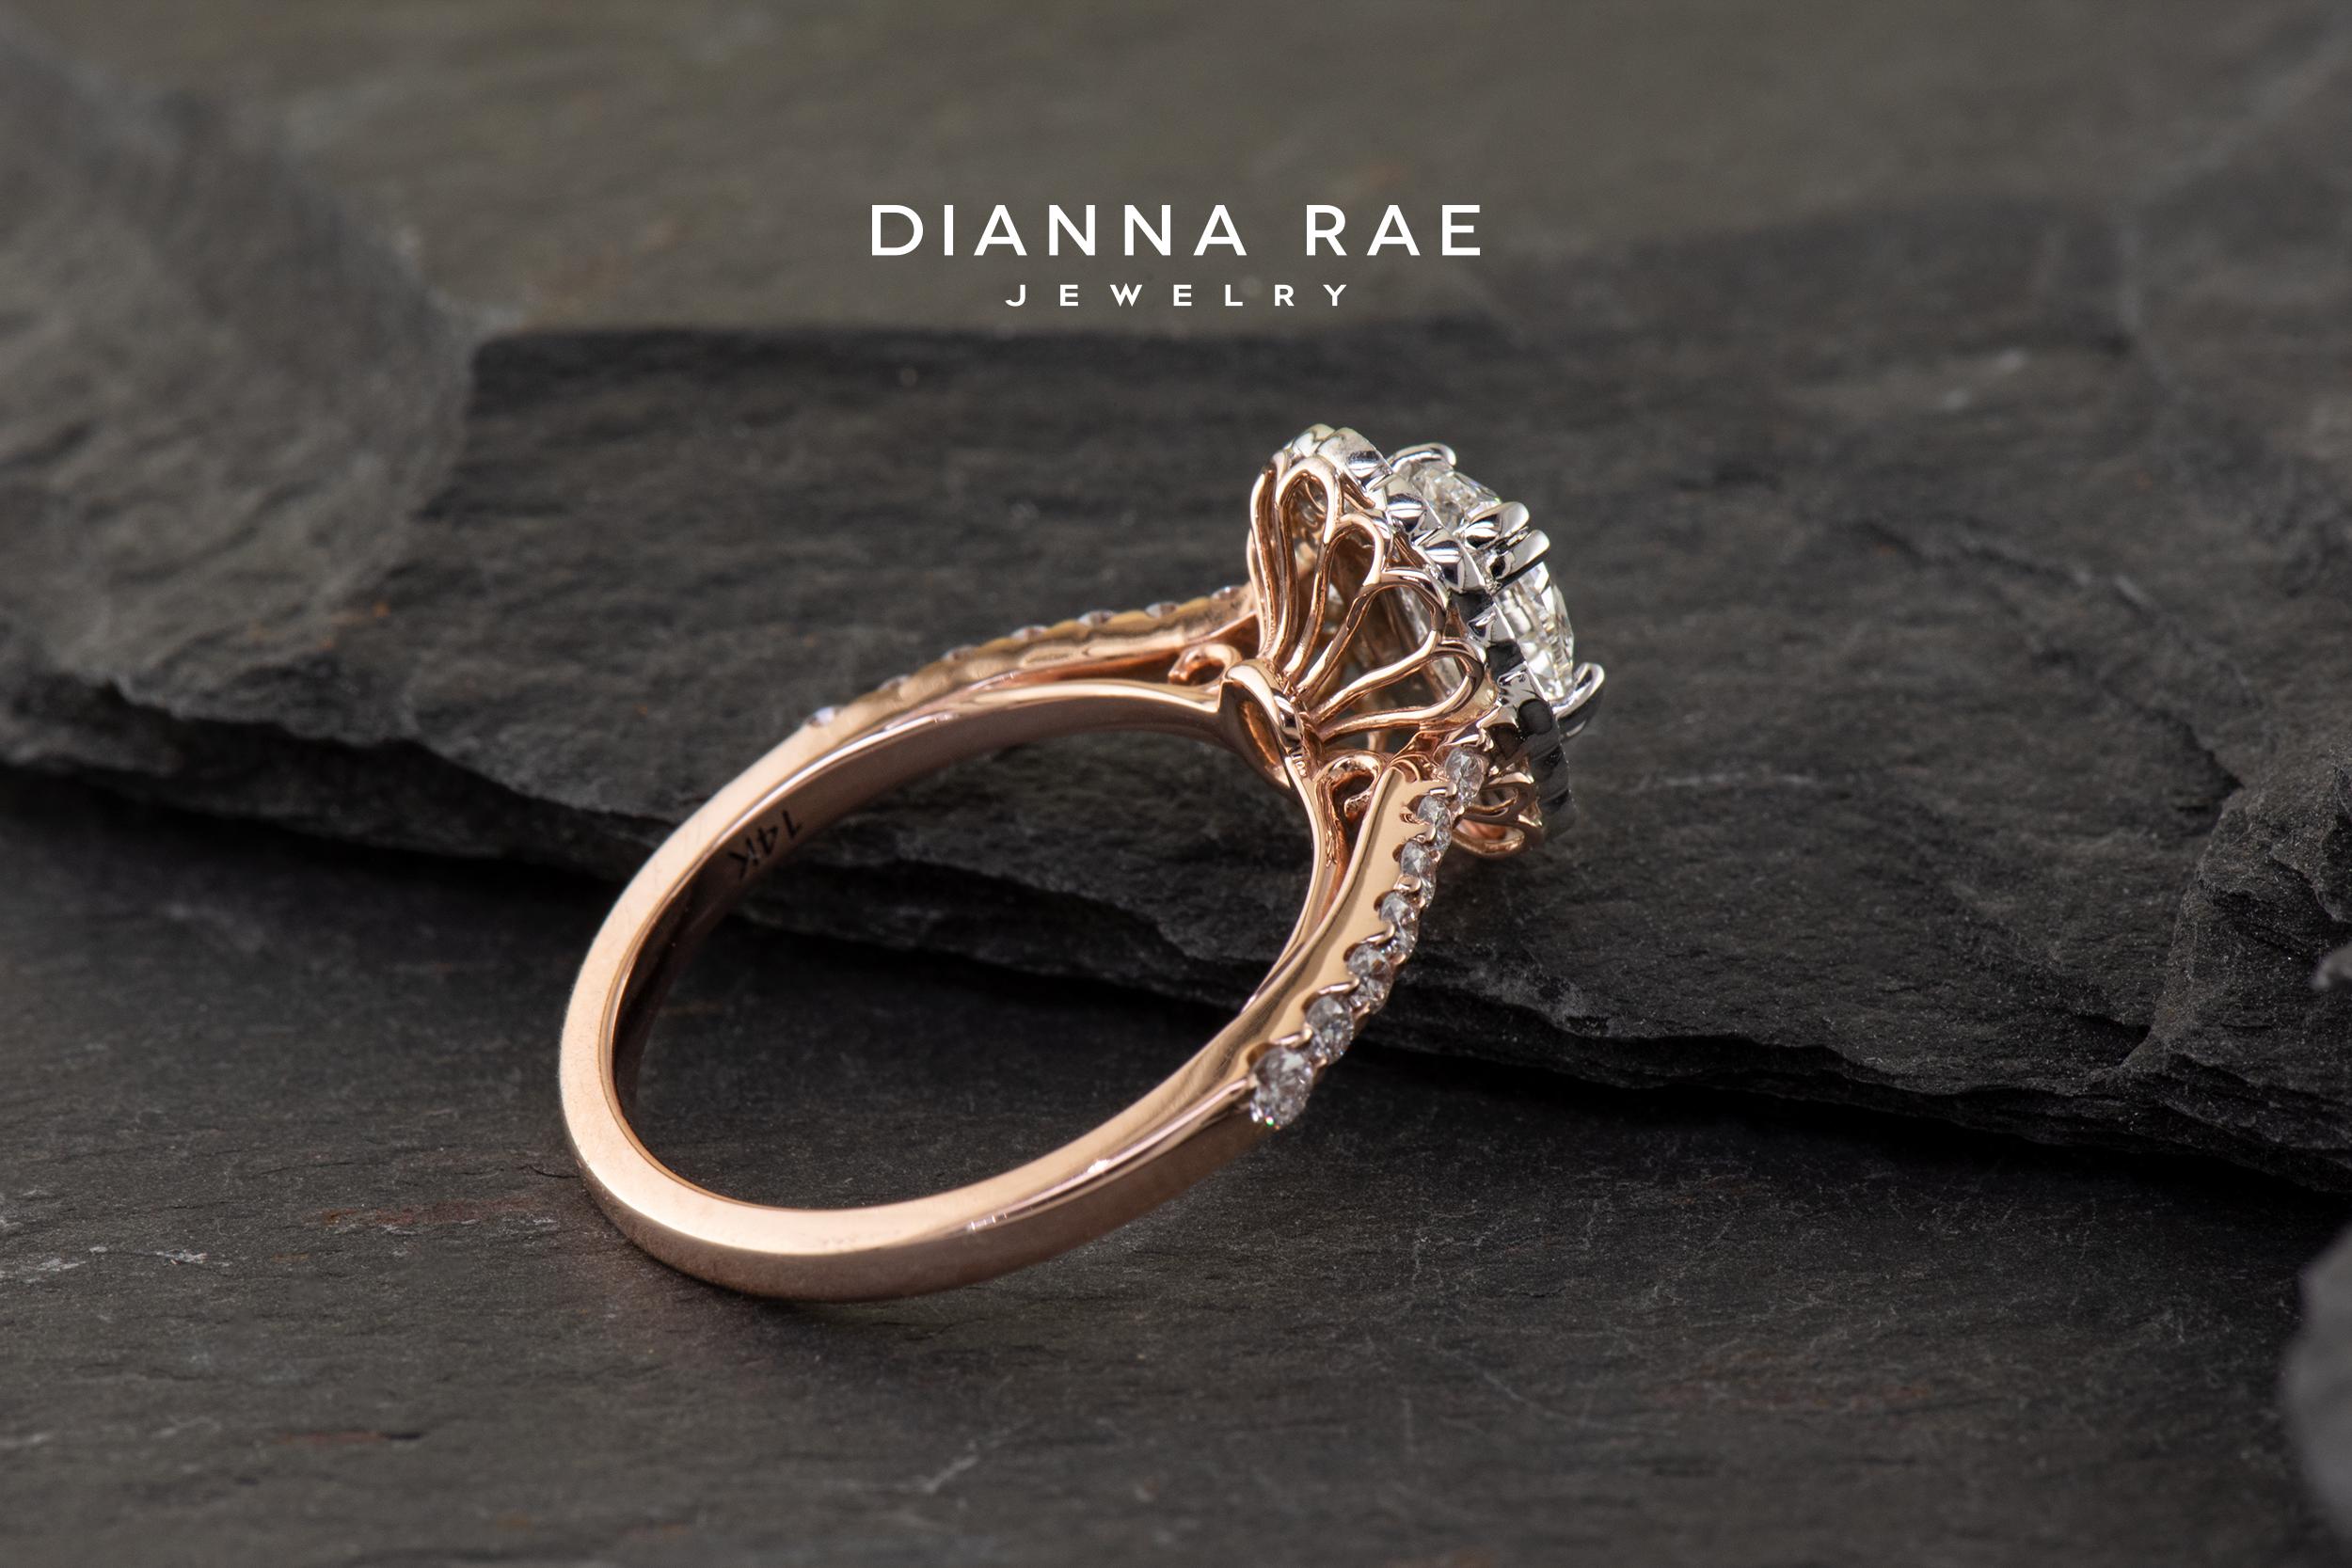 Dianna Rae Jewelry Rose Gold Oval Diamond Engagement Ring with Diamond Band In New Condition For Sale In Lafayette, LA